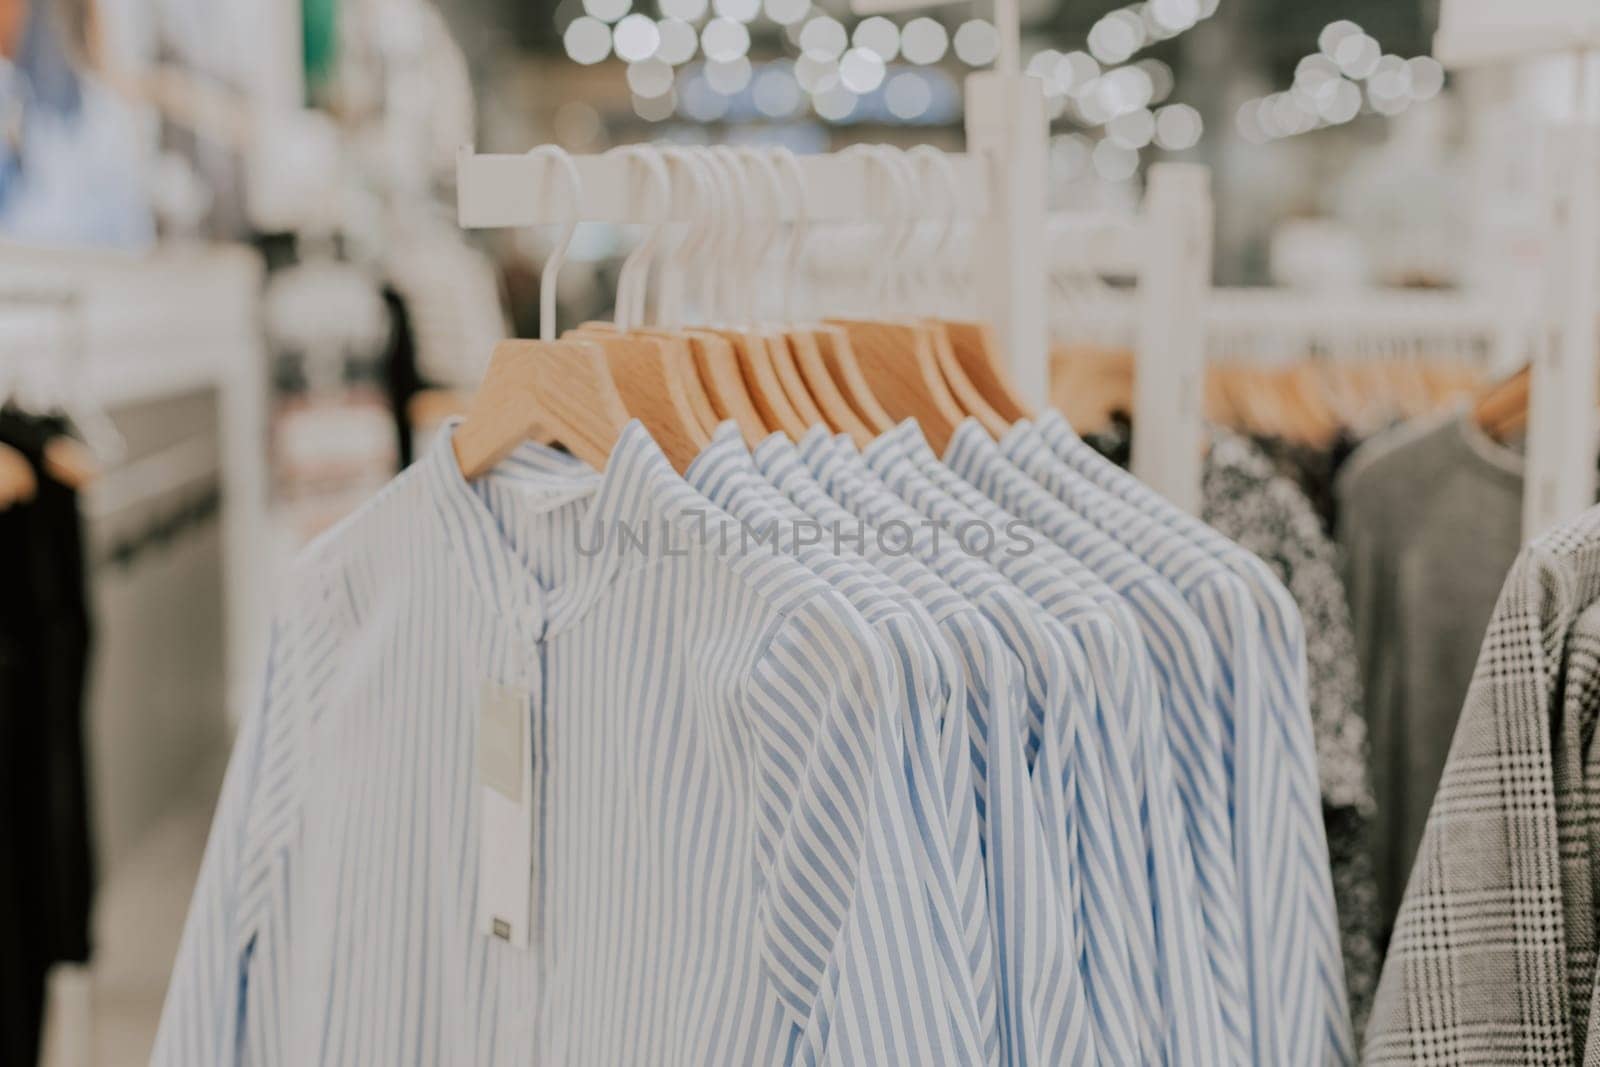 Women's blue and white striped shirts hanging on a hanger. by Nataliya